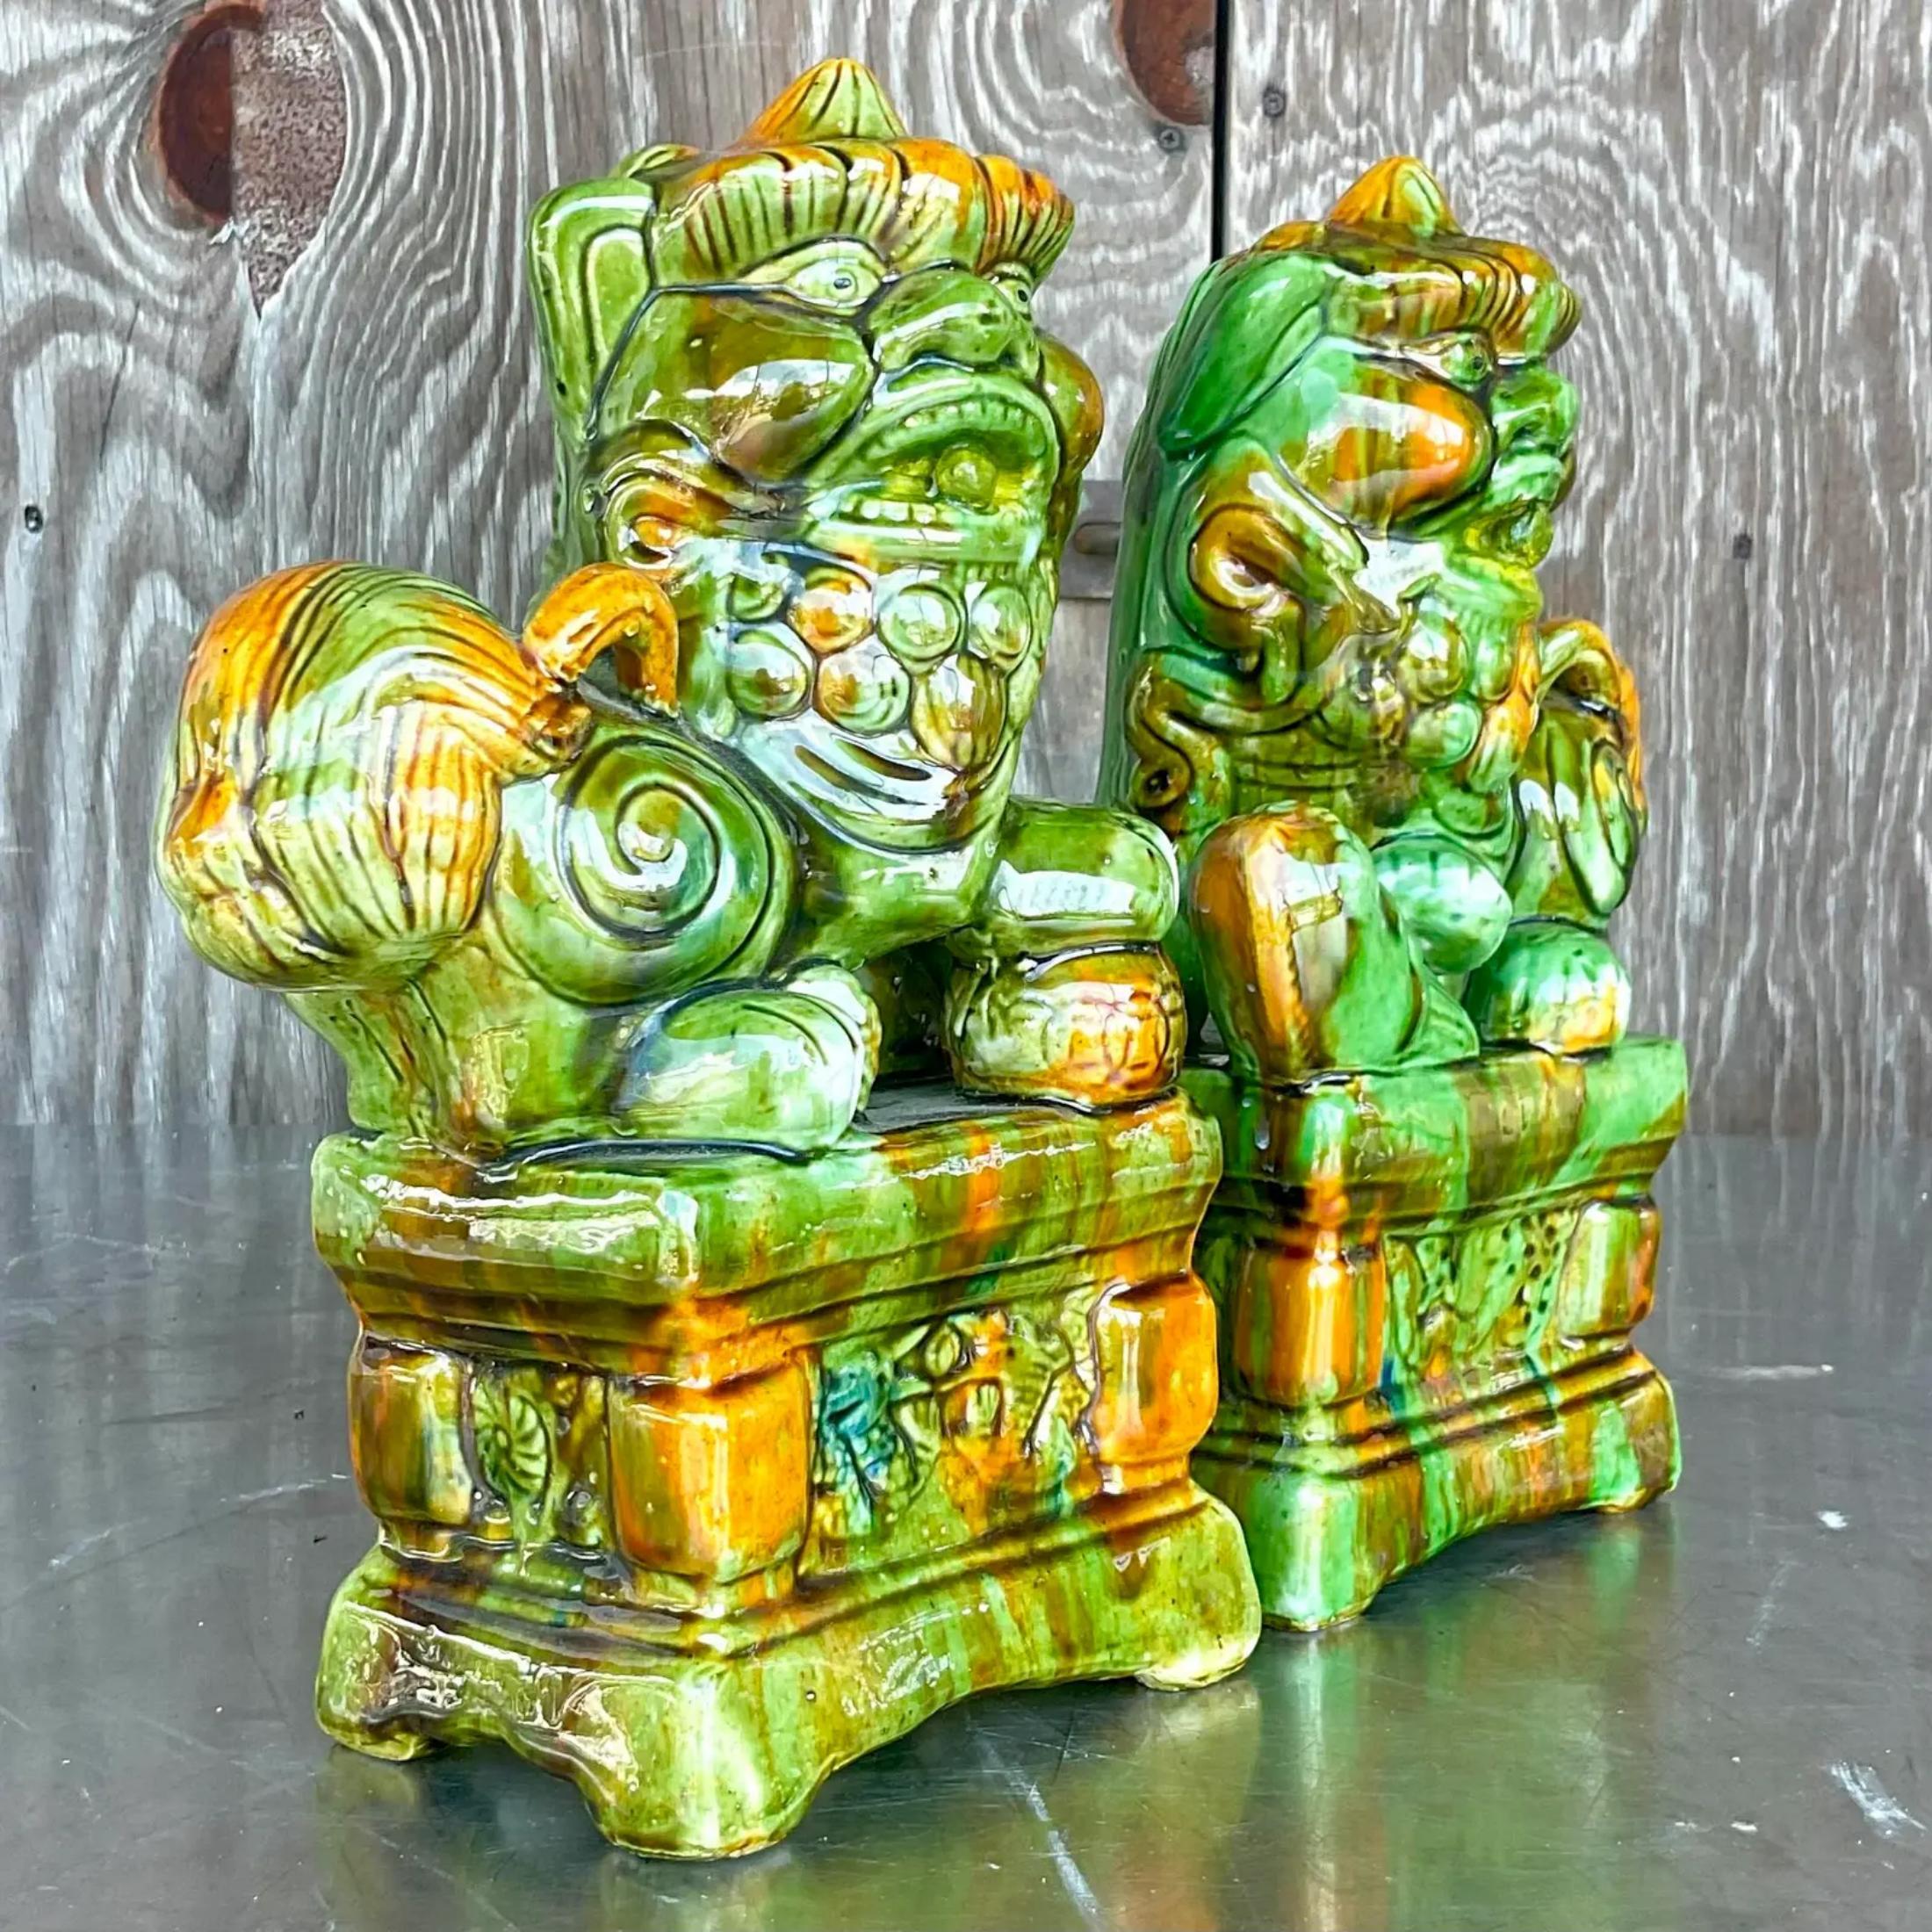 A fabulous pair of vintage Regency Foo dogs. A chic glazed ceramic in a brilliant Emerald green. Acquired from a Palm Beach estate.